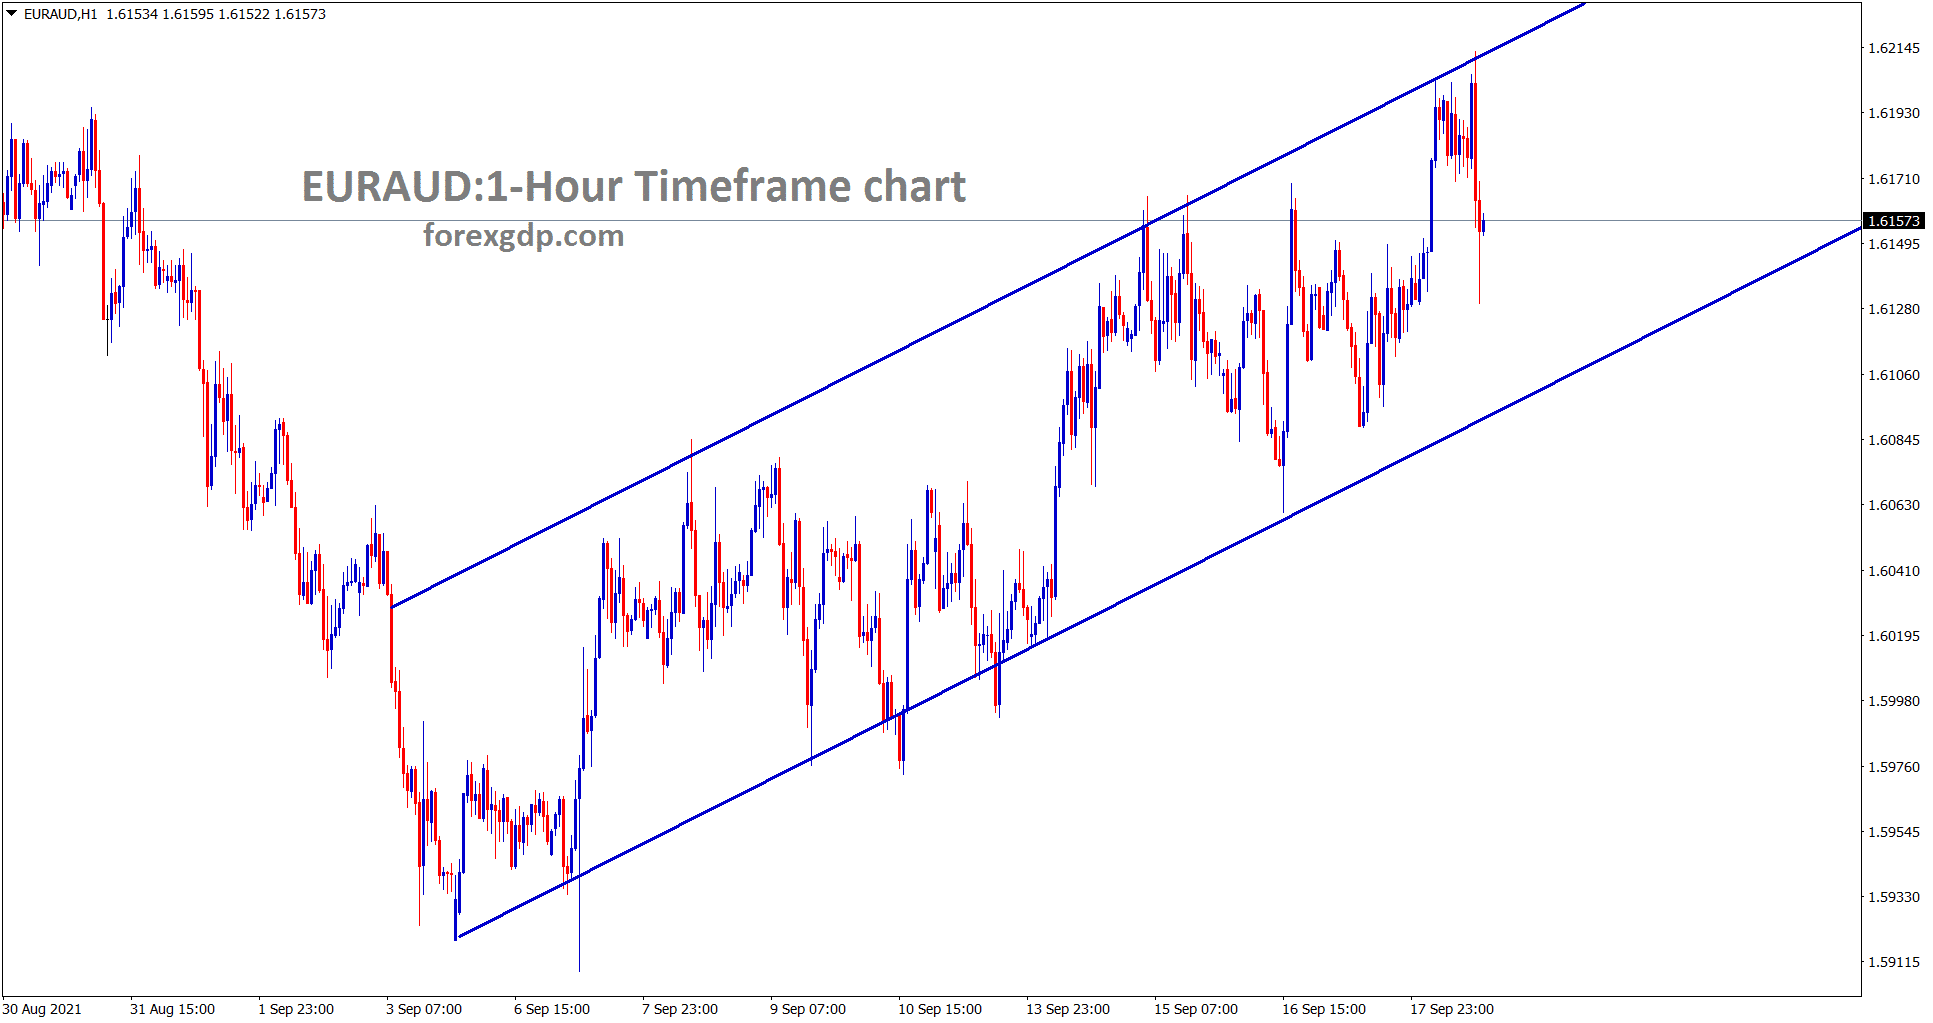 EURAUD is moving in an Ascending channel range in the 1 hour timeframe